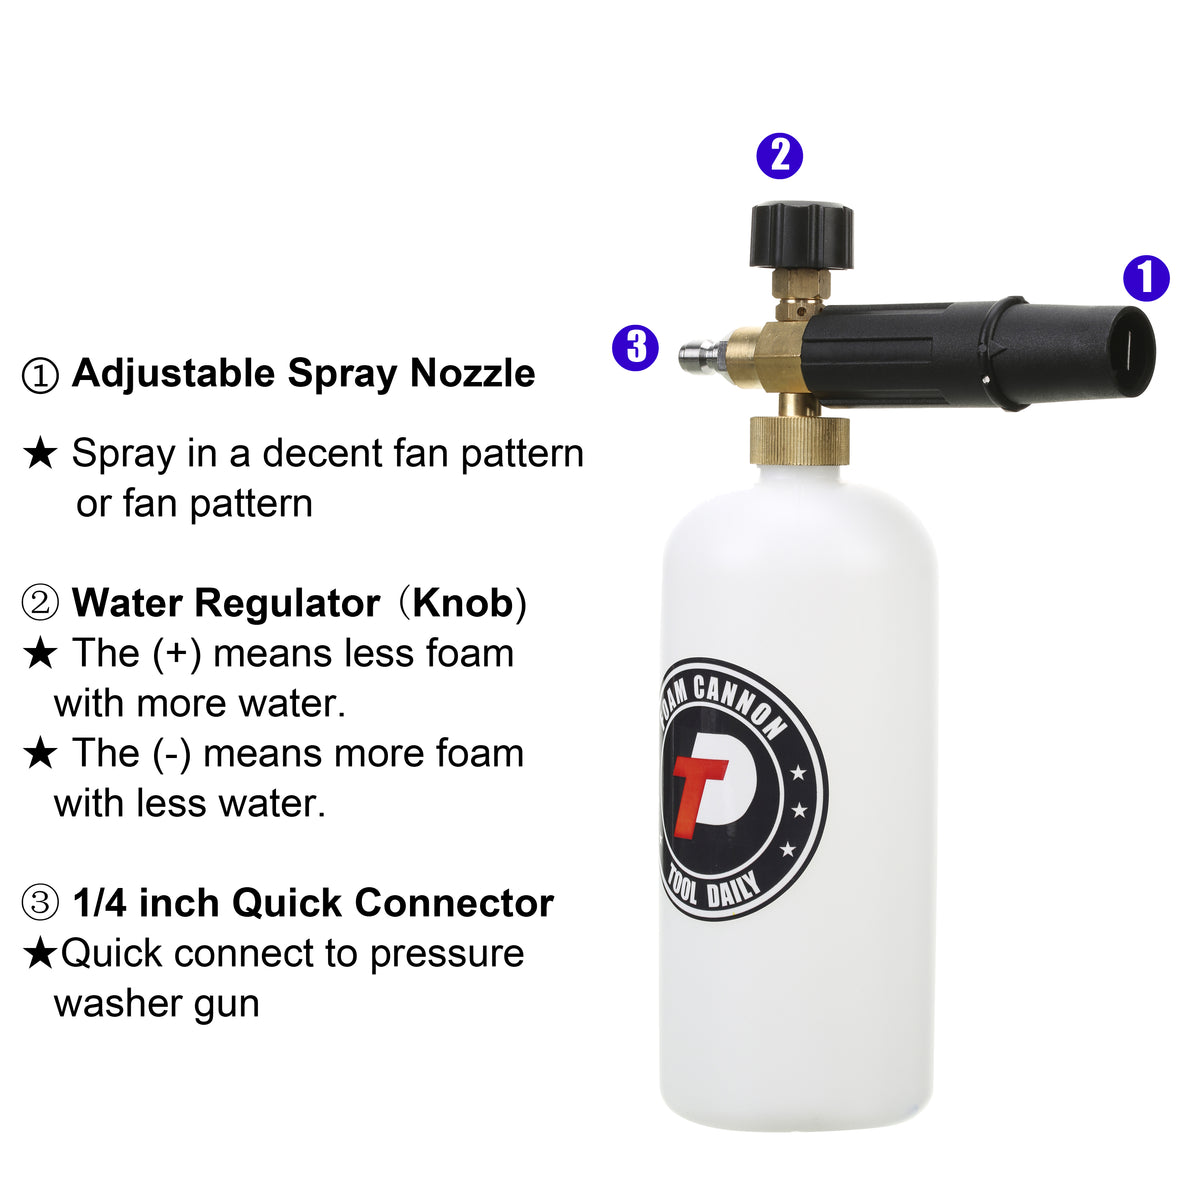 M MINGLE Foam Cannon for Pressure Washer, Car Foam Sprayer with 1/4 Inch  Quick Connector